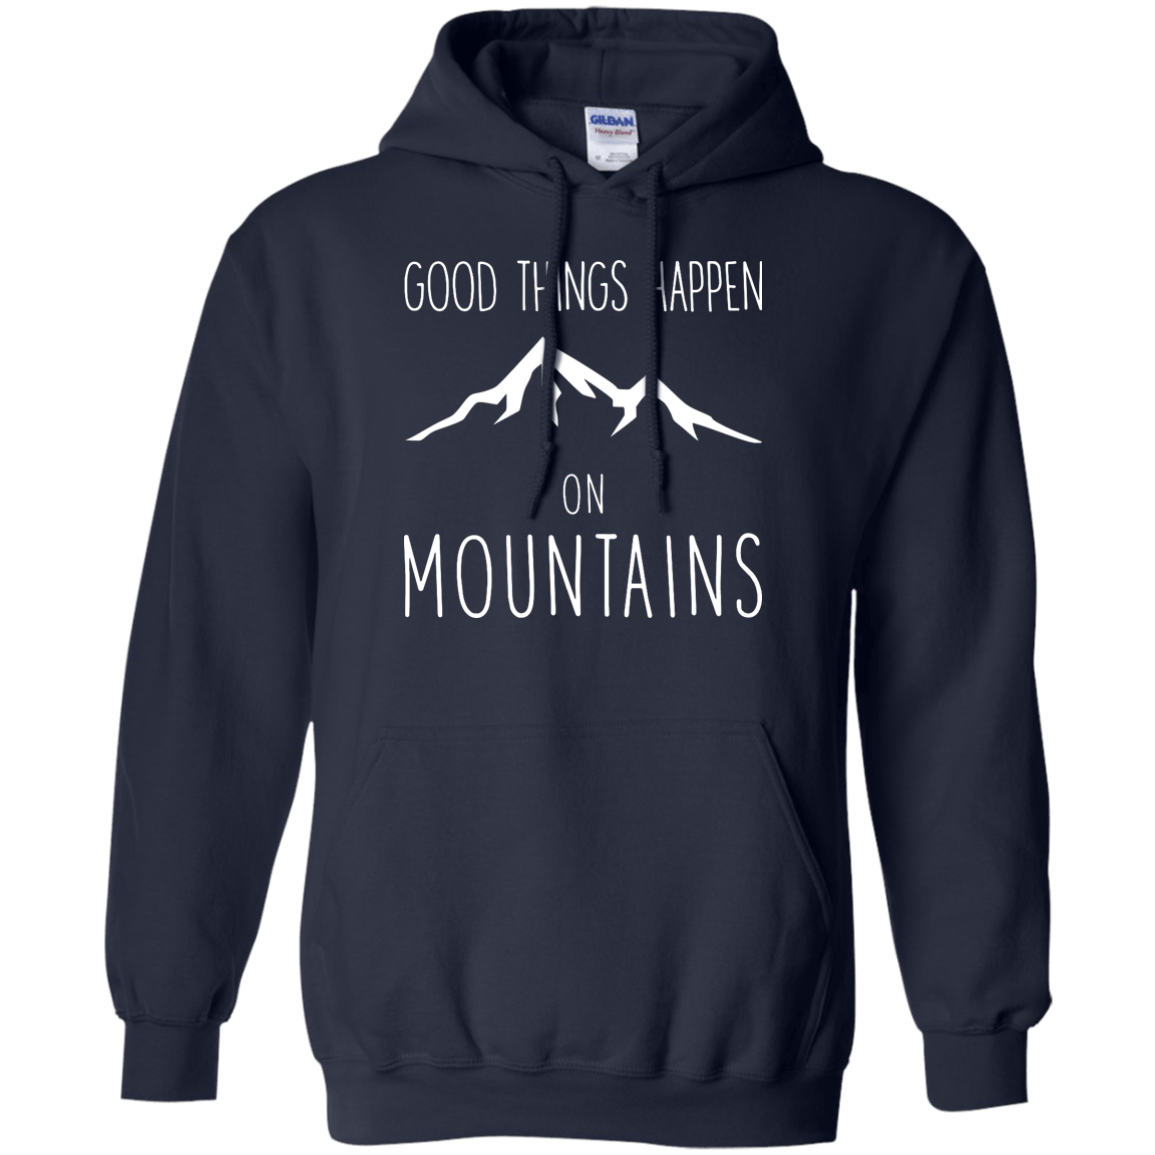 Good Things Happen On The Mountains Hoodies - Powderaddicts